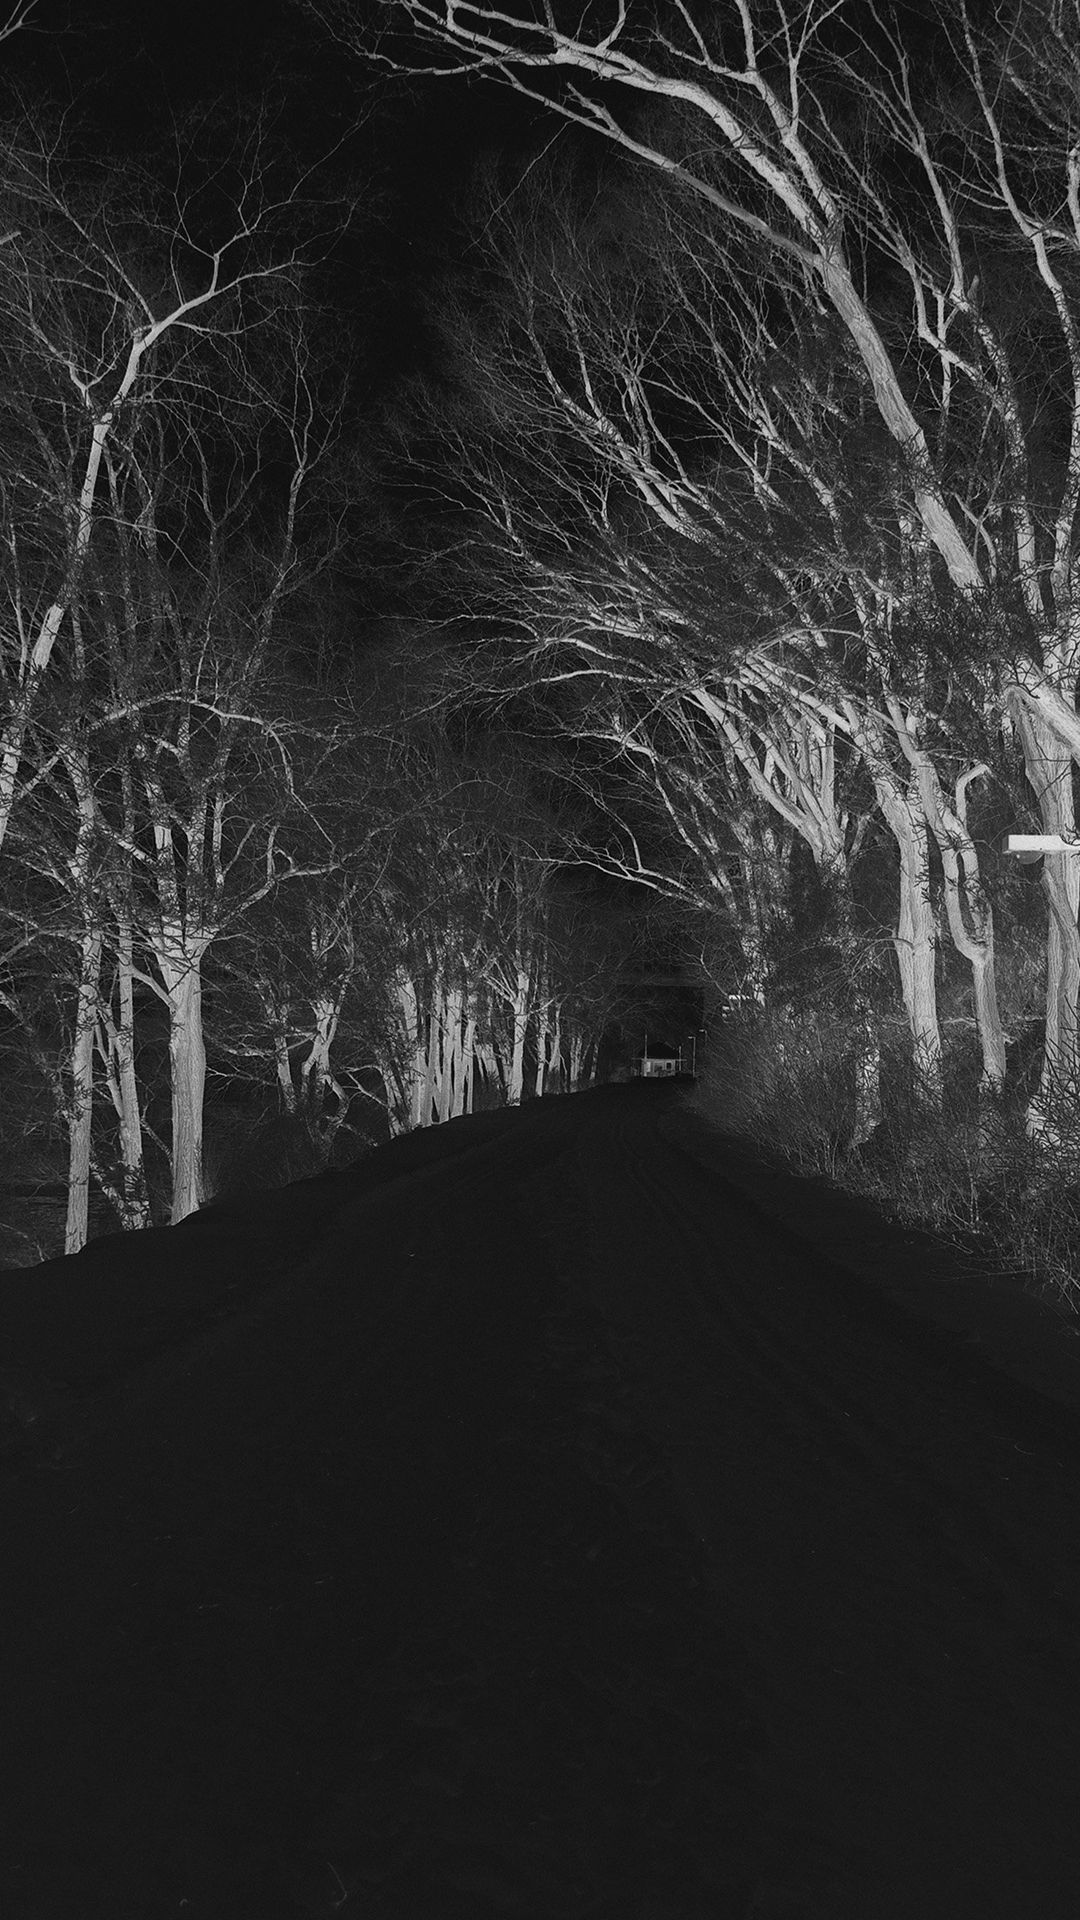 Winter Scary Road Nature Mountain Dark iPhone 6 Wallpaper Download. iPhone Wallpaper, iPad wallpaper On. Scary wallpaper, Dark wallpaper iphone, Dark wallpaper